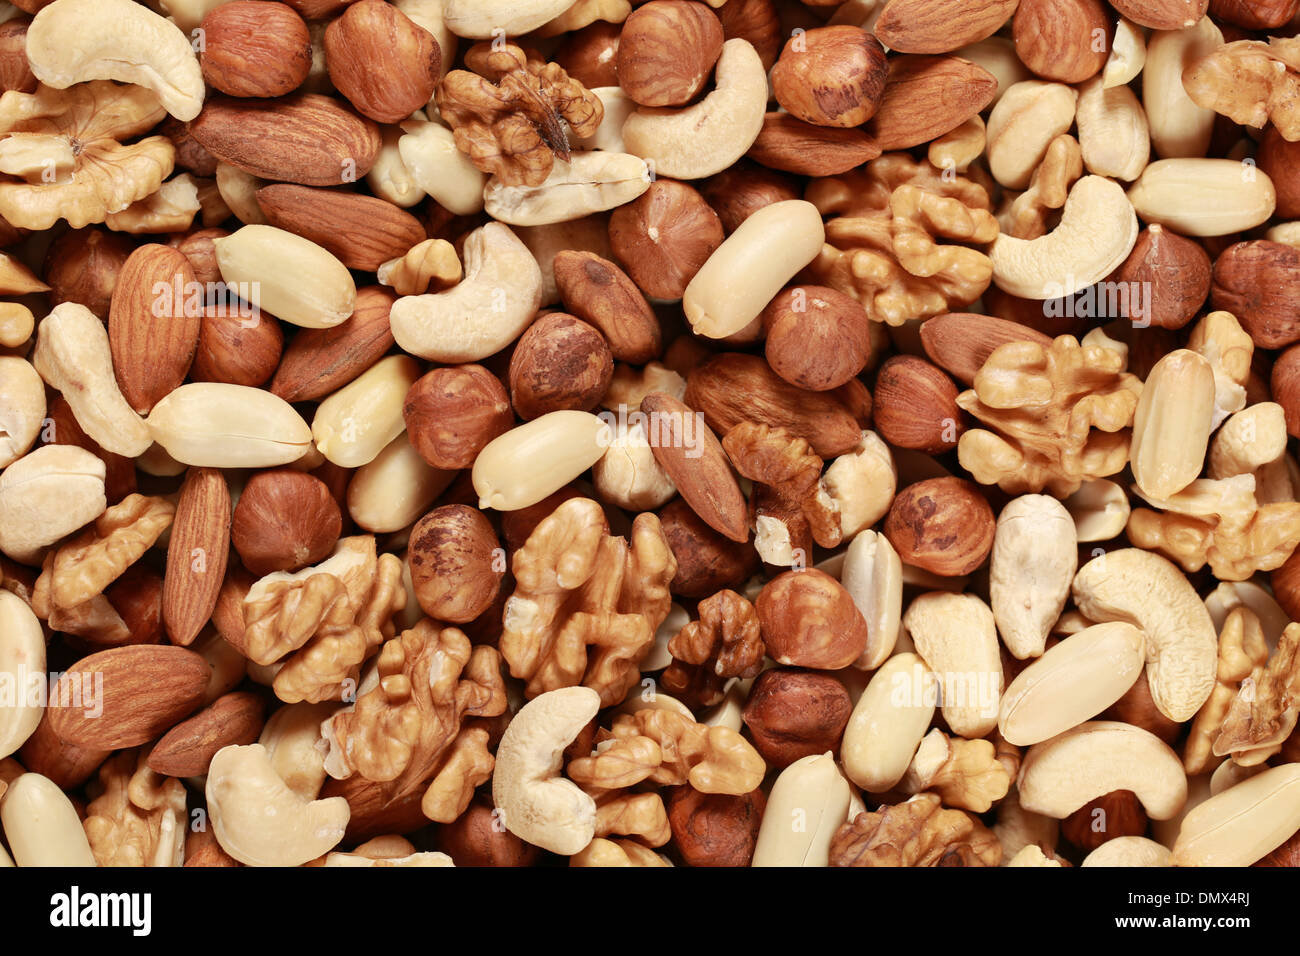 Peanuts, walnuts, almonds, hazelnuts and cashews forming a nuts background Stock Photo